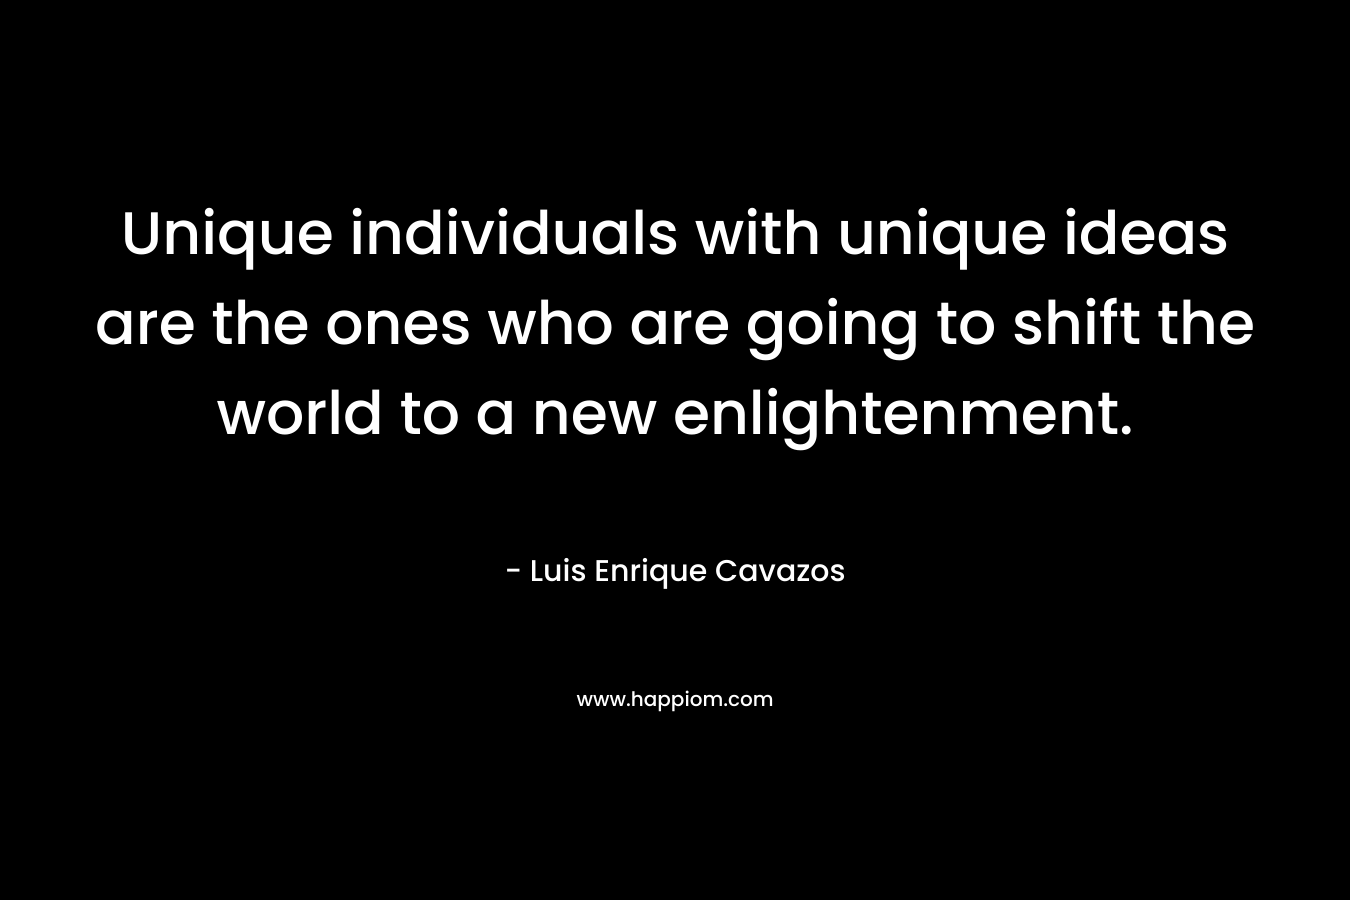 Unique individuals with unique ideas are the ones who are going to shift the world to a new enlightenment. – Luis Enrique Cavazos